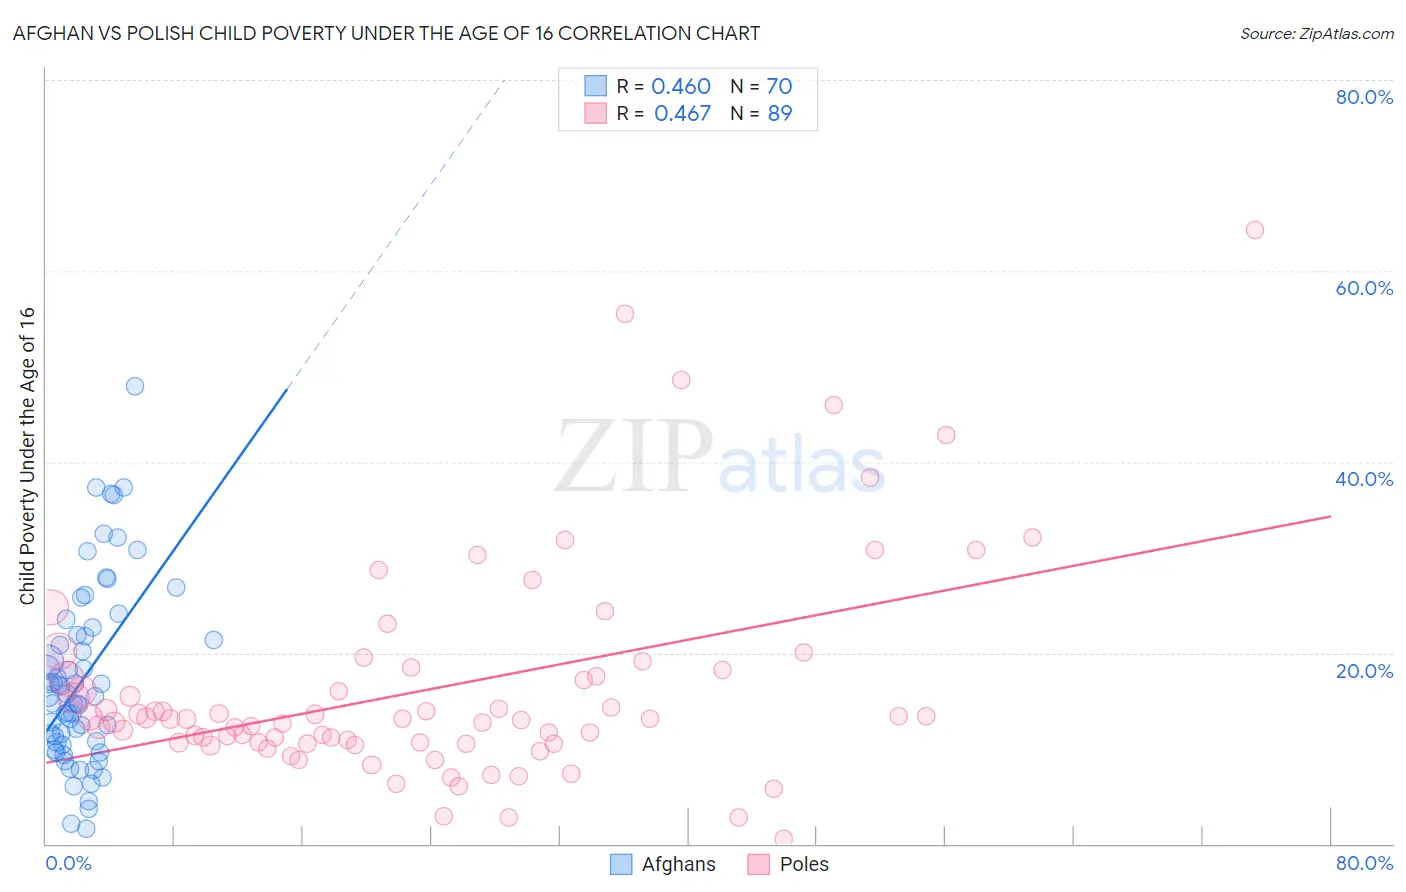 Afghan vs Polish Child Poverty Under the Age of 16